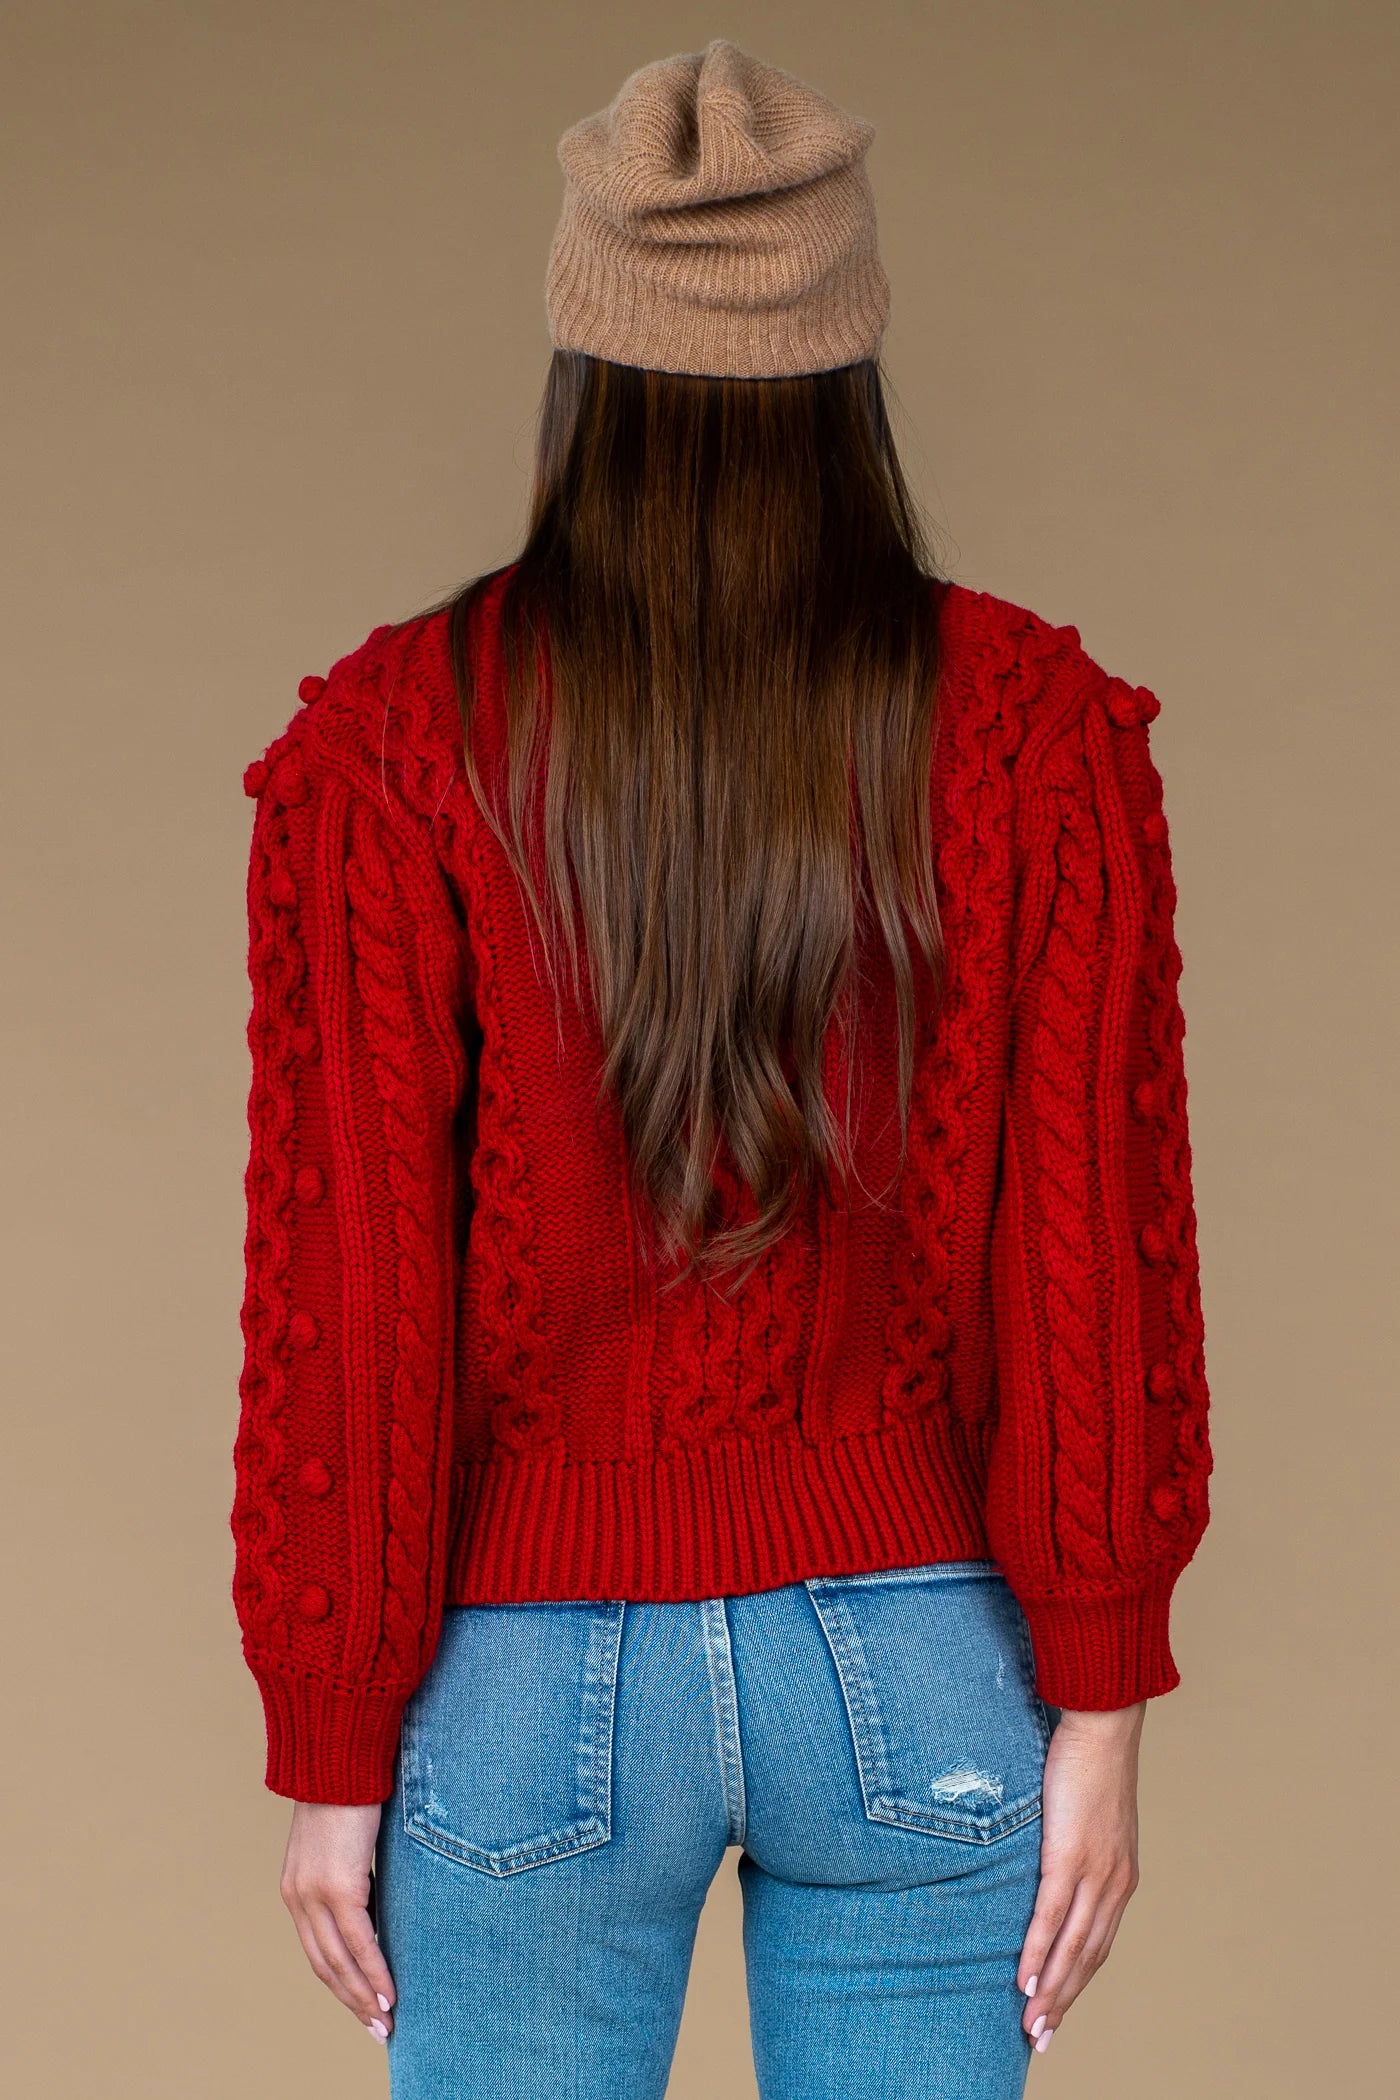 Poppy Bubble Knit Sweater by Olivia James the Label